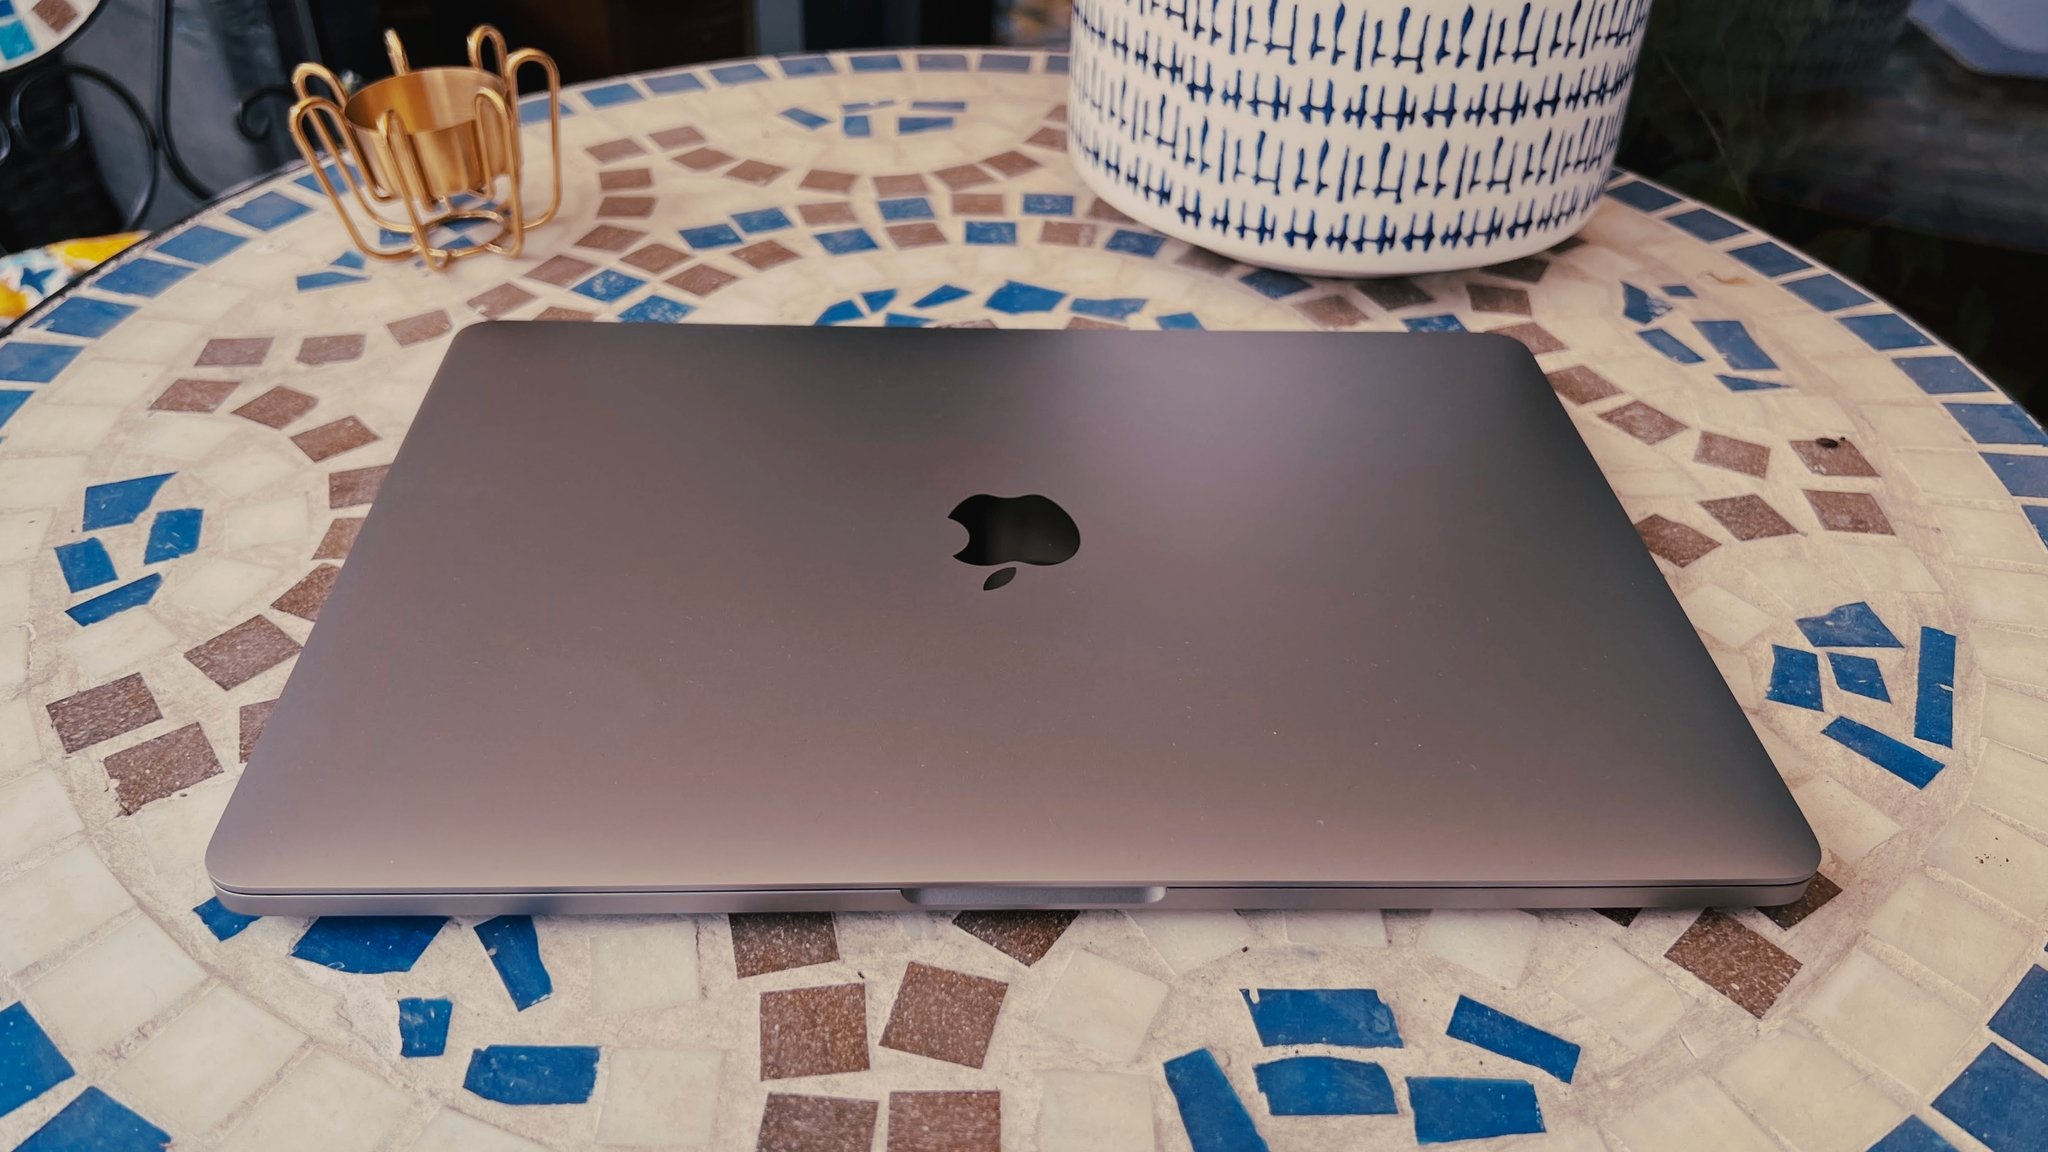 A 13-inch MacBook Pro on top of a colorful table